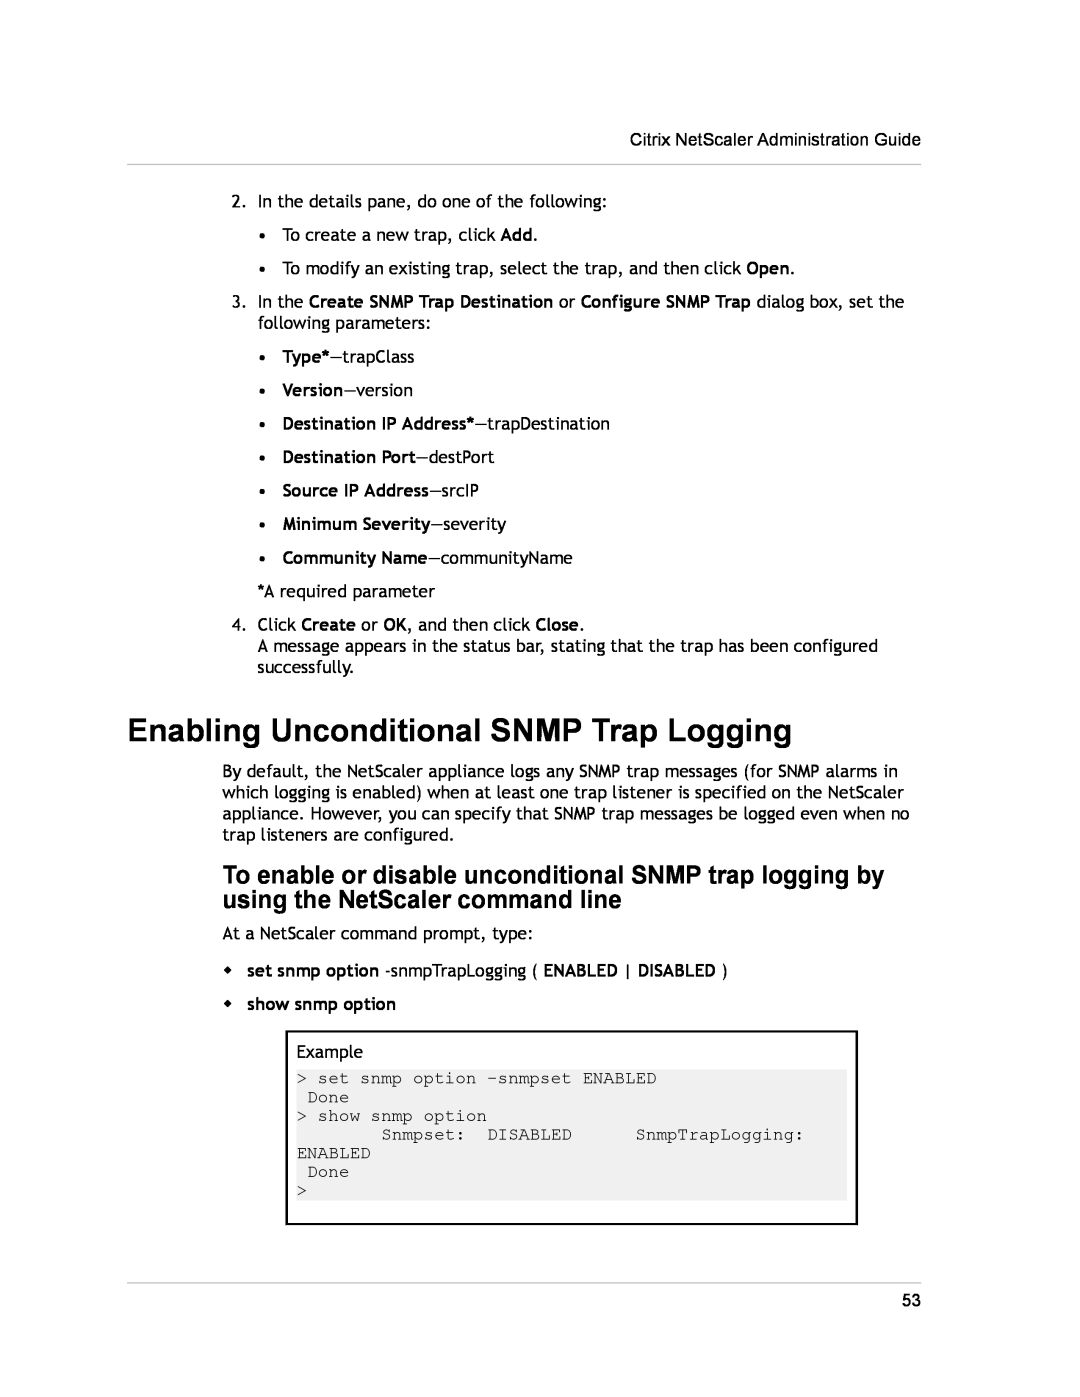 Citrix Systems CITRIX NETSCALER 9.3 manual Enabling Unconditional SNMP Trap Logging, Community Name-communityName 